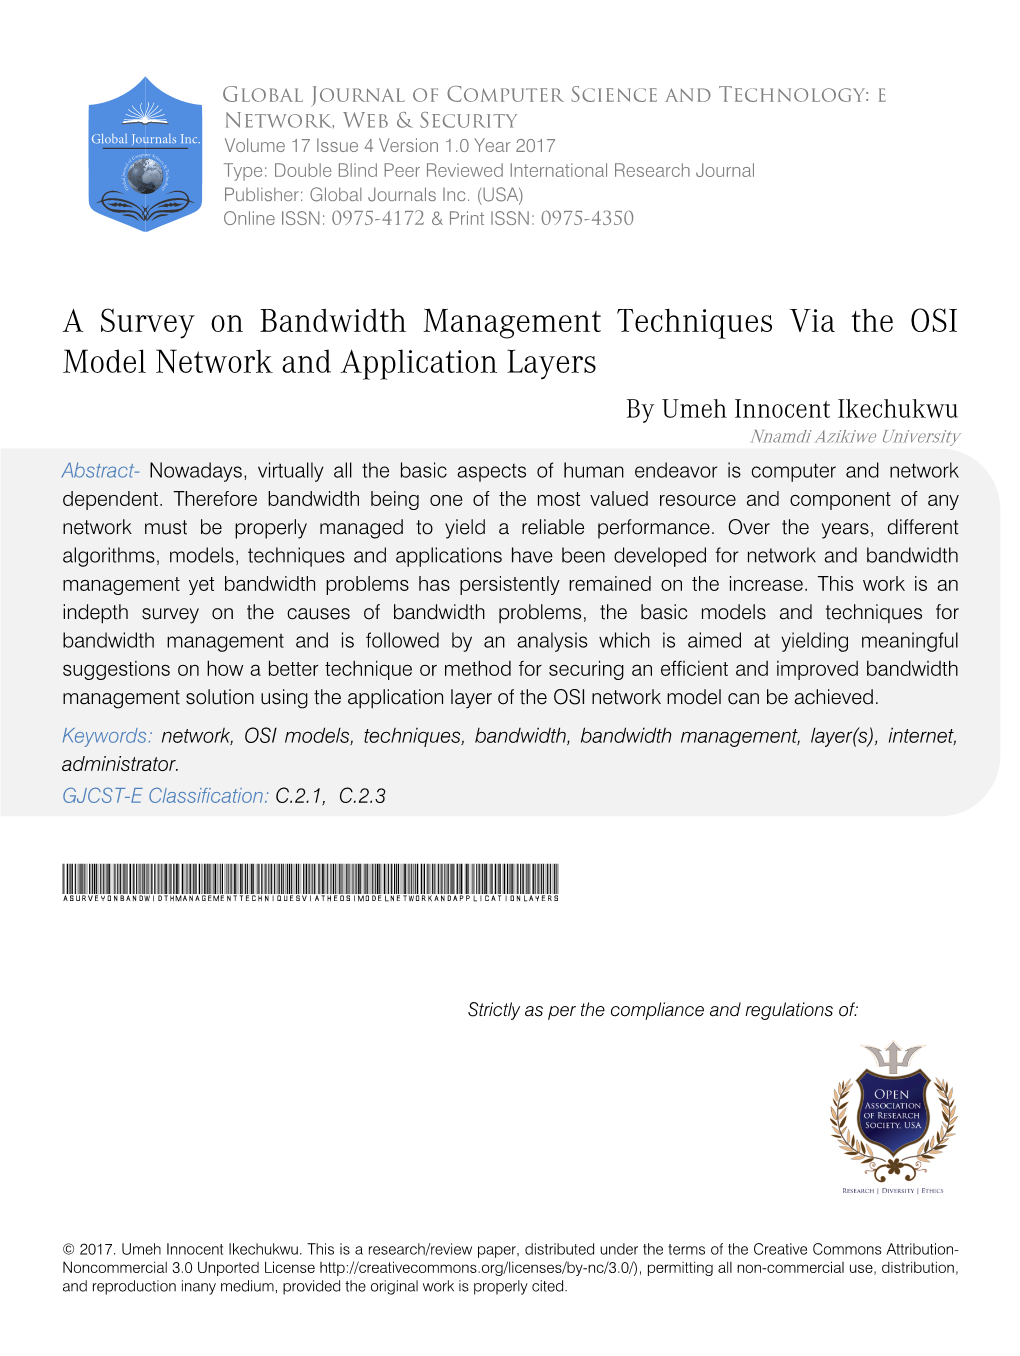 A Survey on Bandwidth Management Techniques Via the OSI Model Network and Application Layers